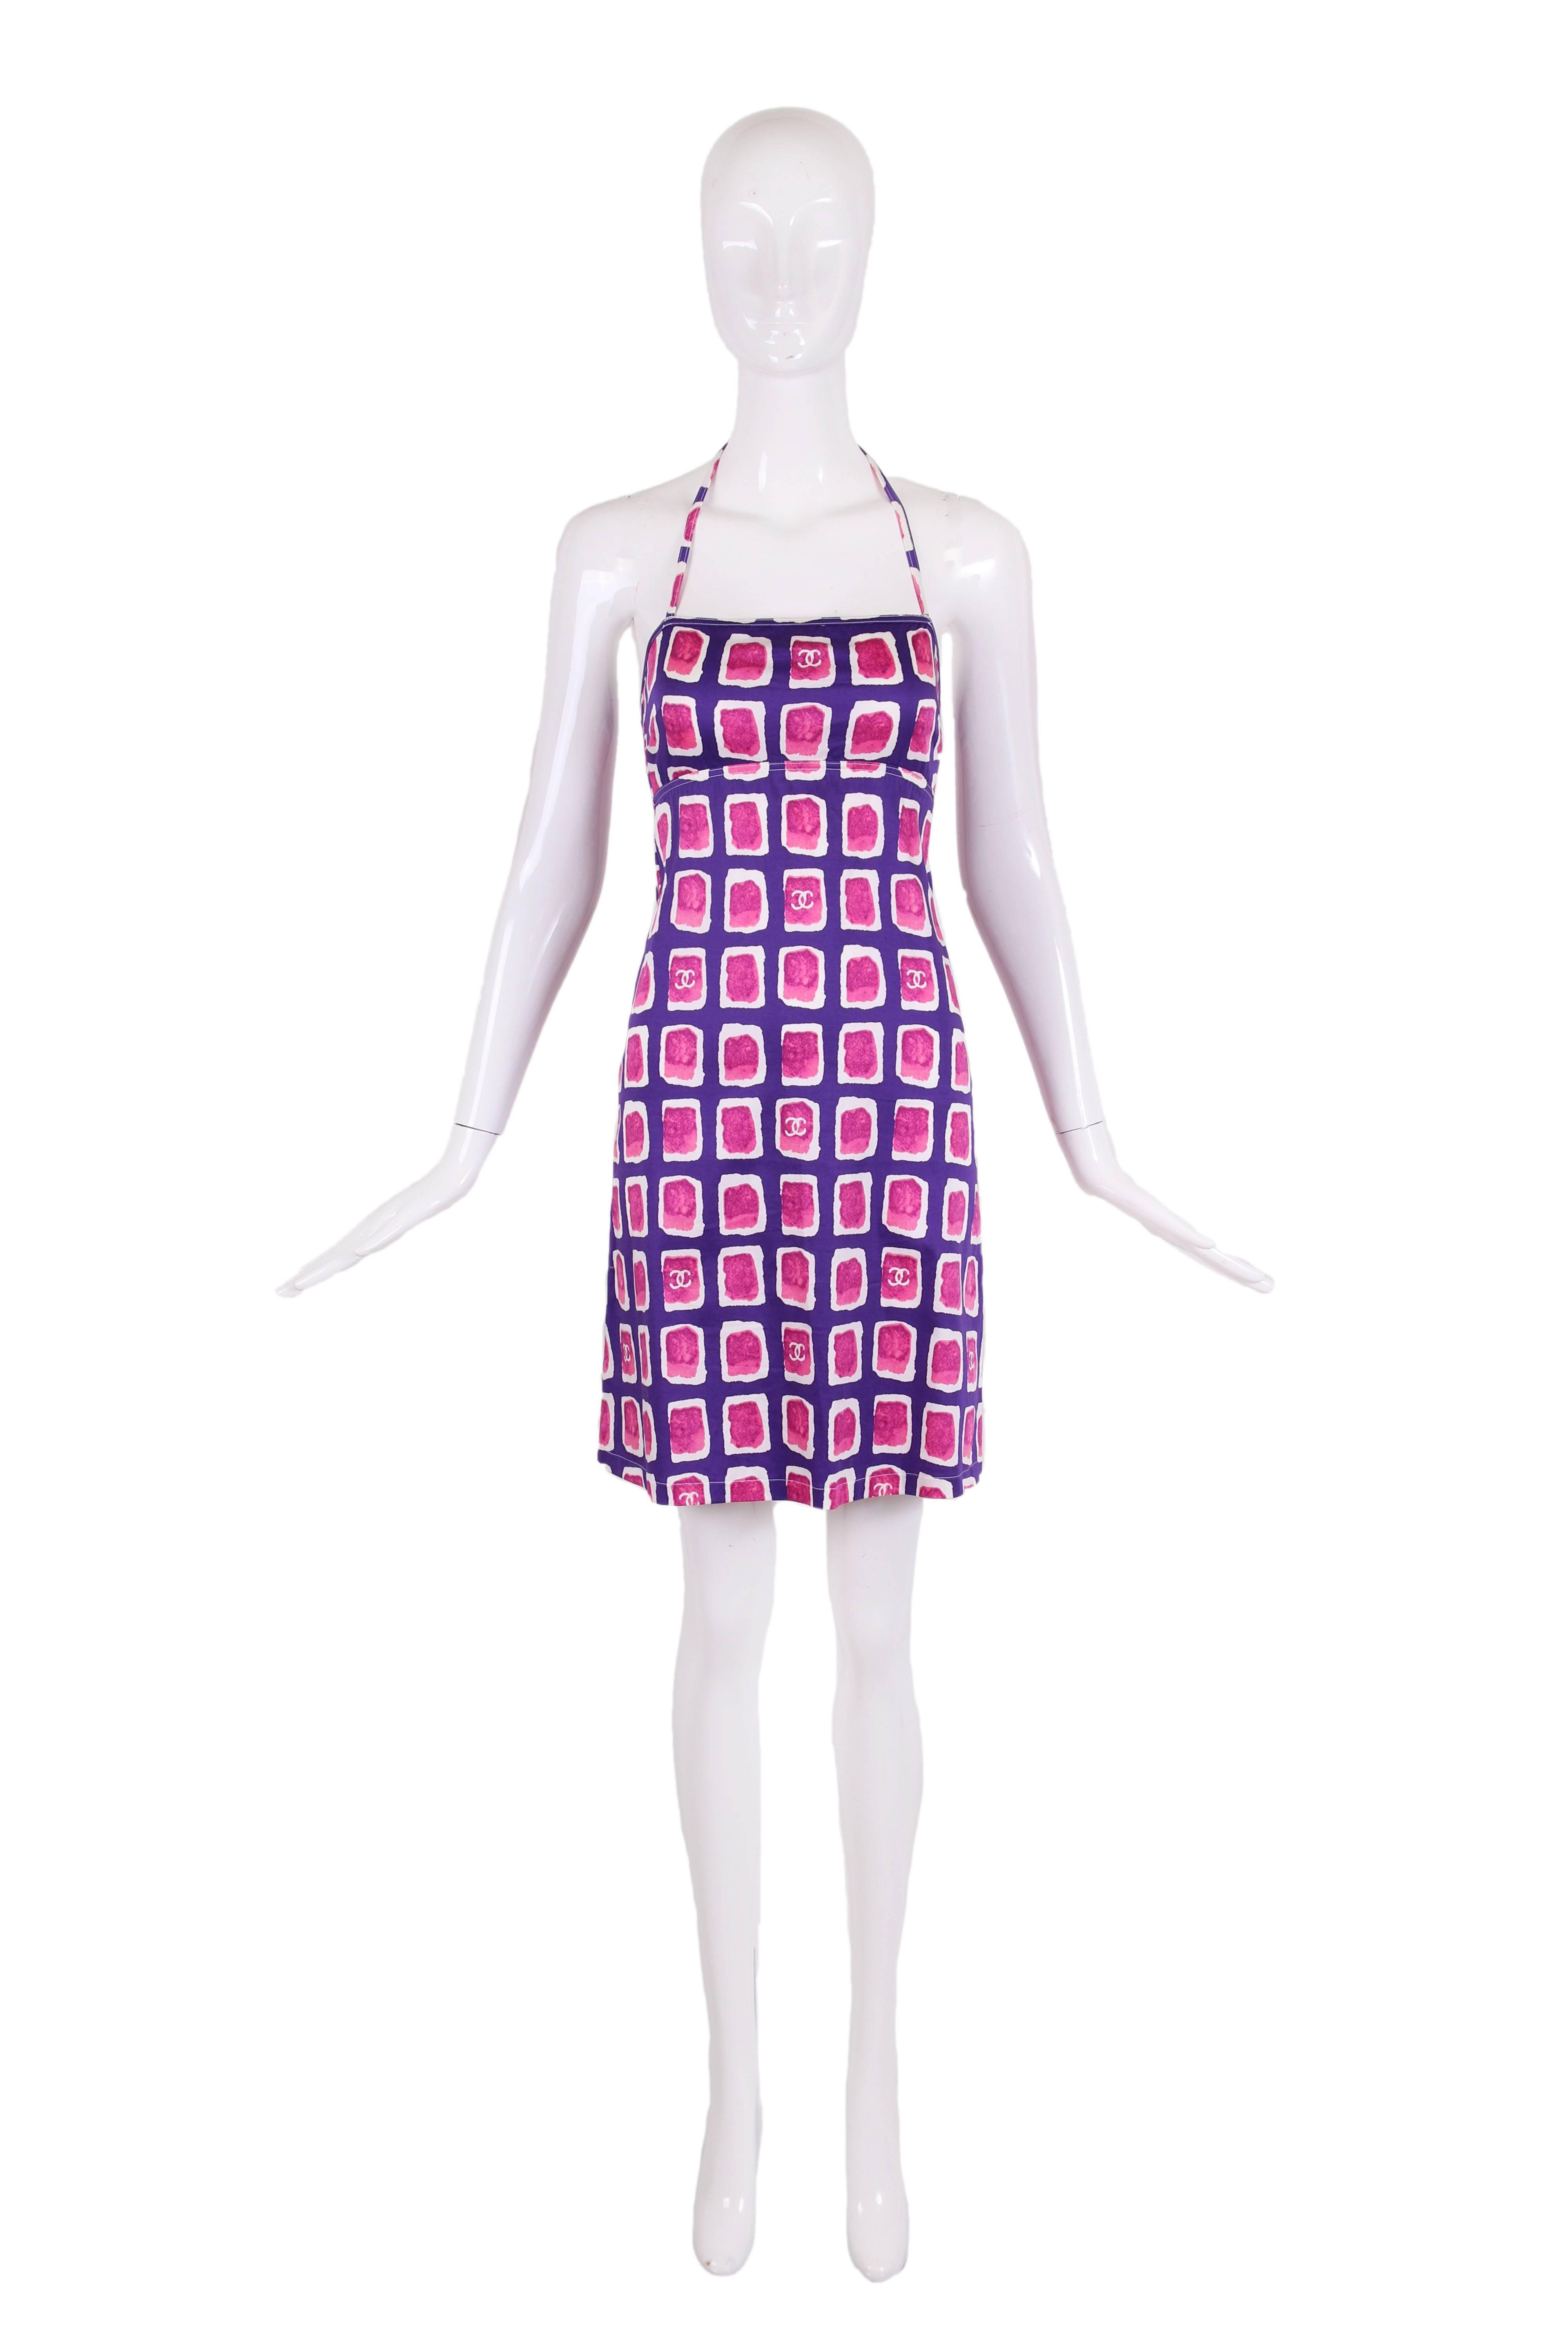 2001 Chanel purple, pink and white printed summer dress with CC logo in print. Dress is a cotton and viscose blend, size 34 and in excellent condition. Please see measurements.
MEASUREMENTS:
Bust - 30